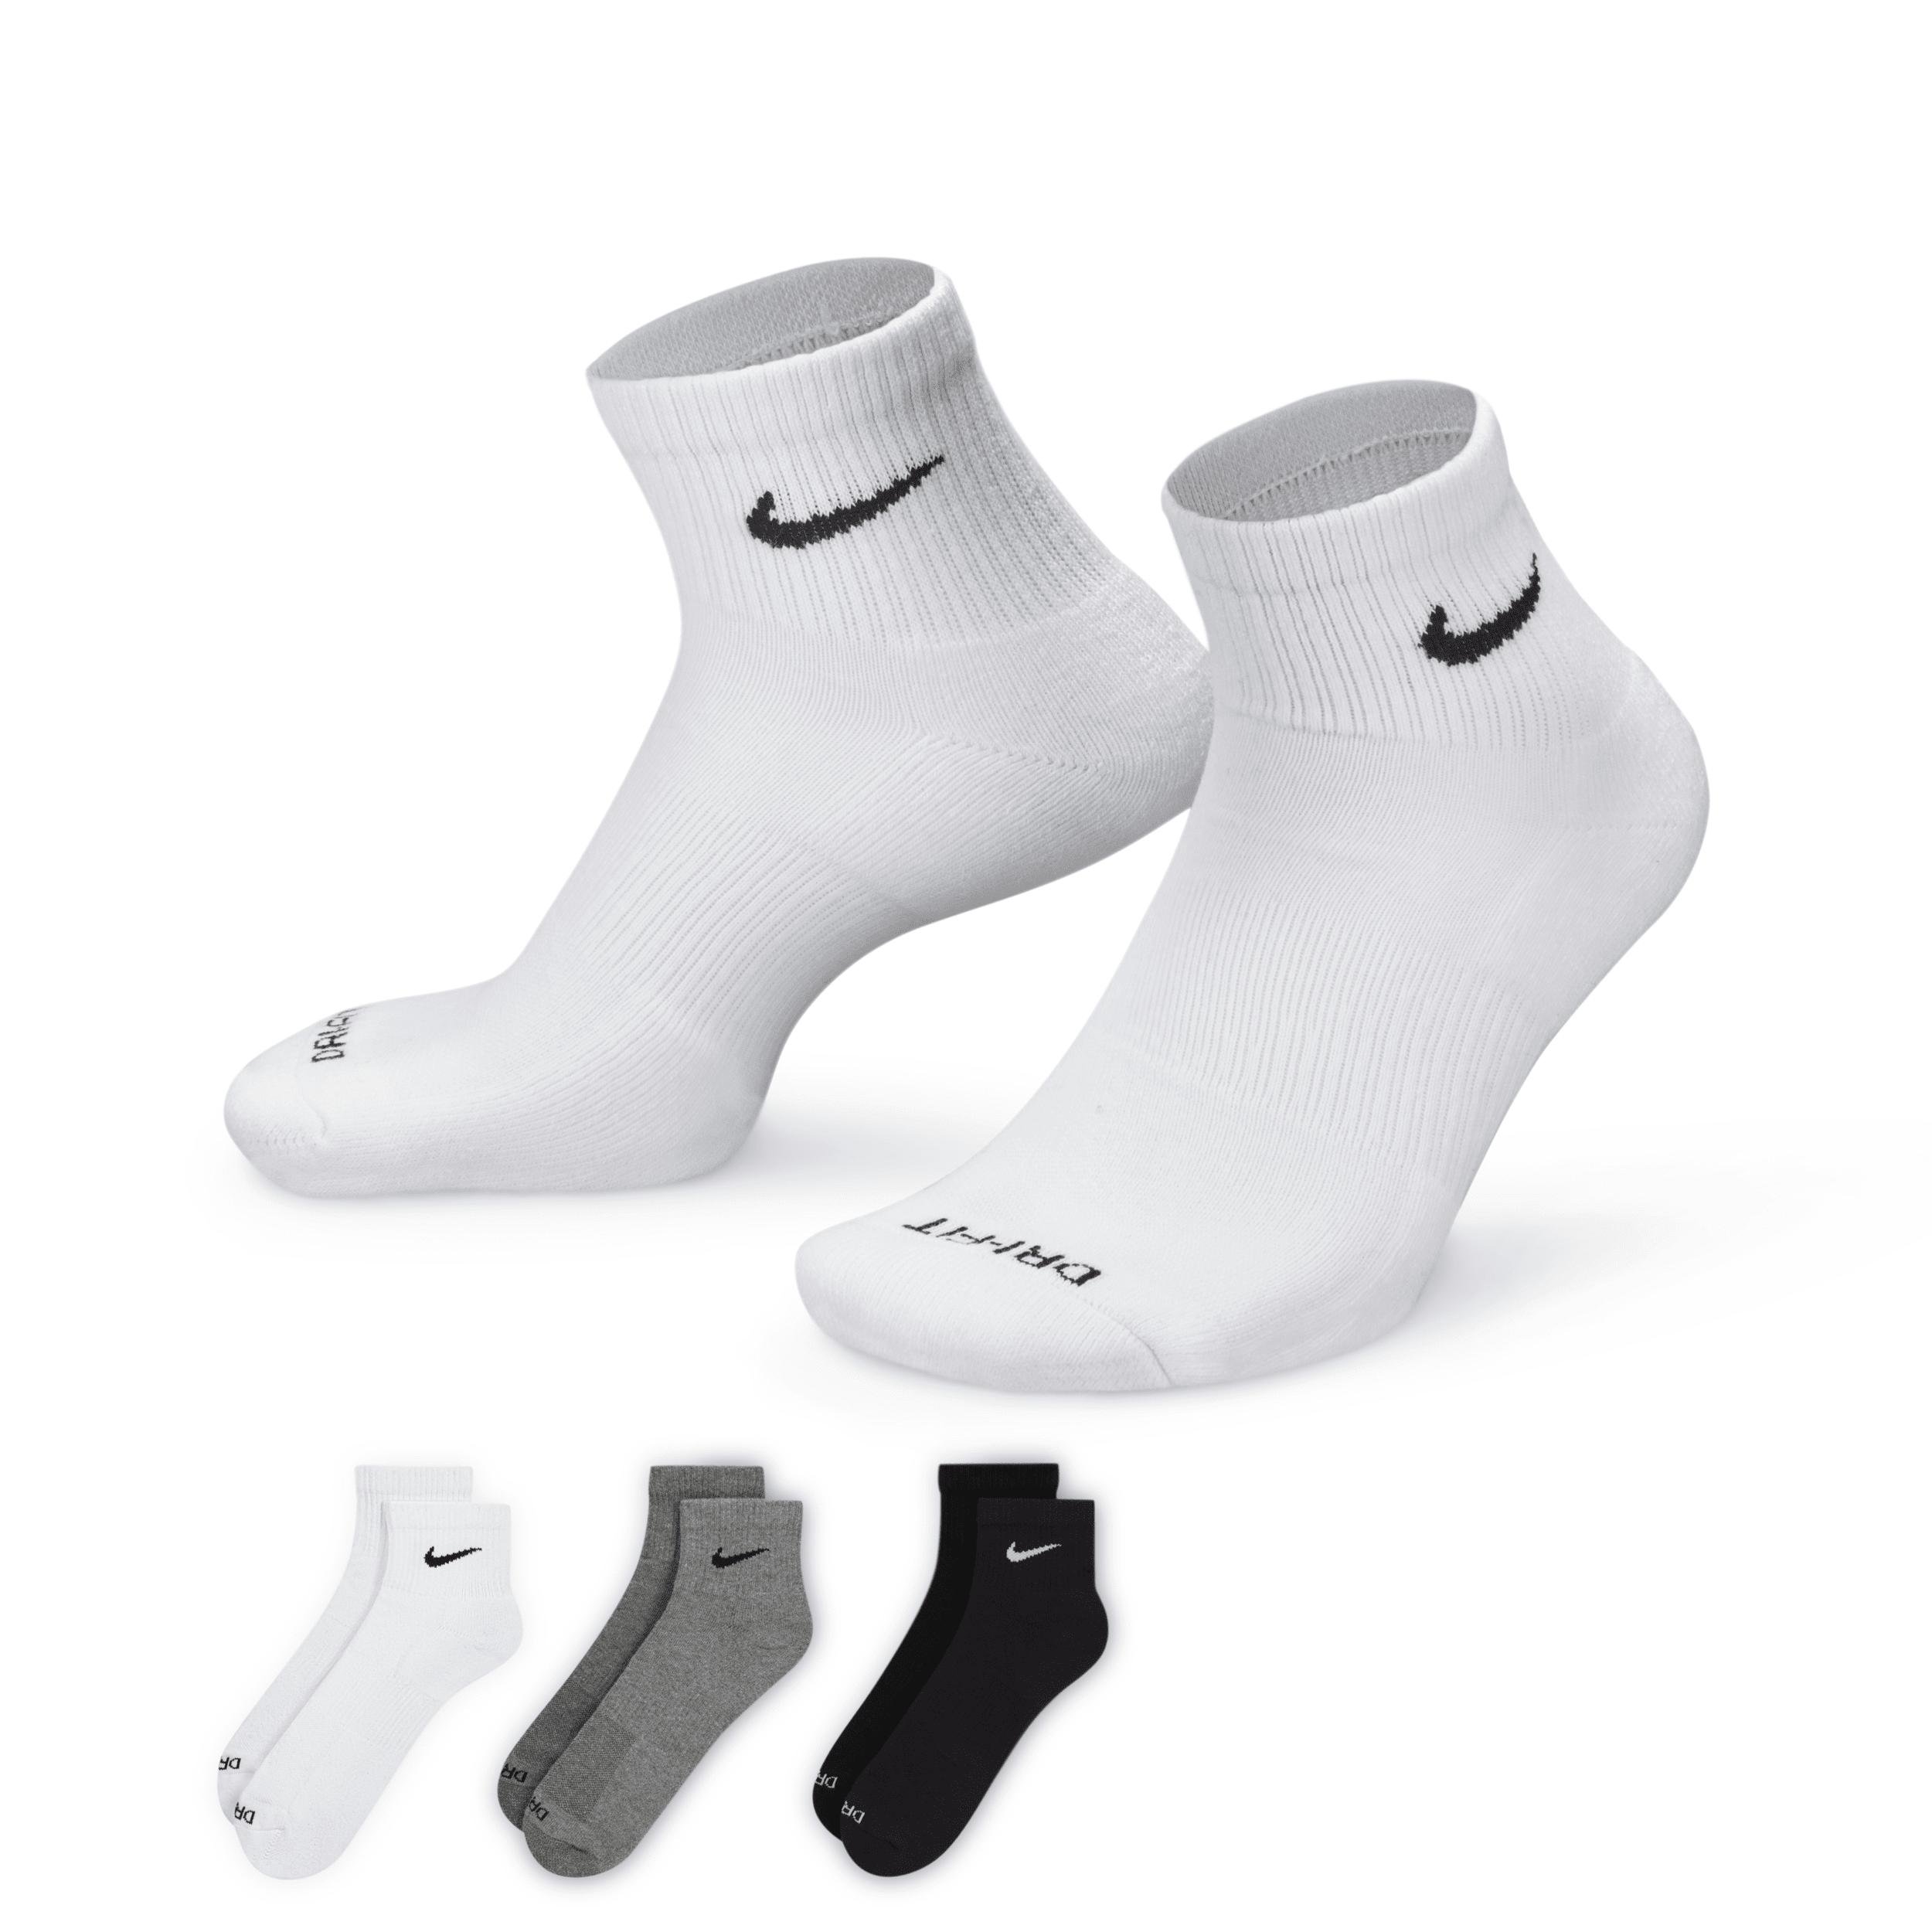 Nike Men's Everyday Plus Cushioned Training Ankle Socks (3 Pairs) by NIKE